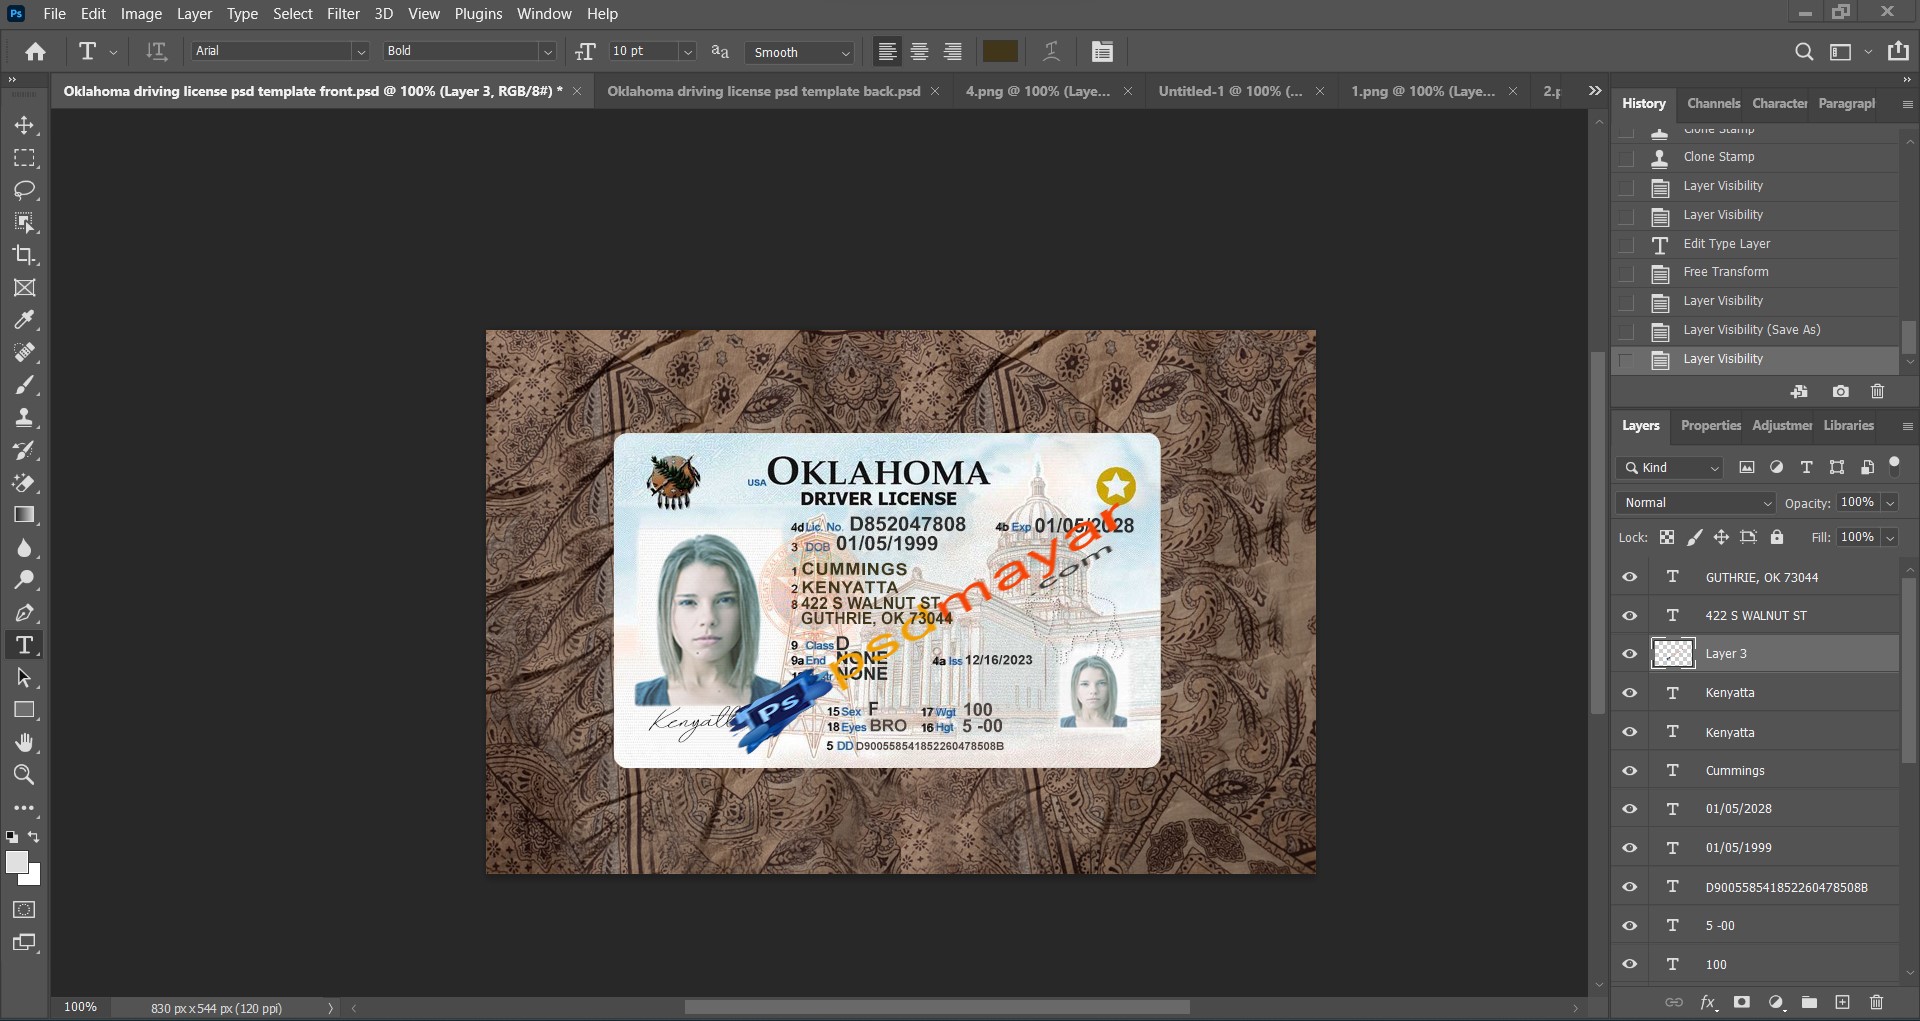 Oklahoma driving license psd template